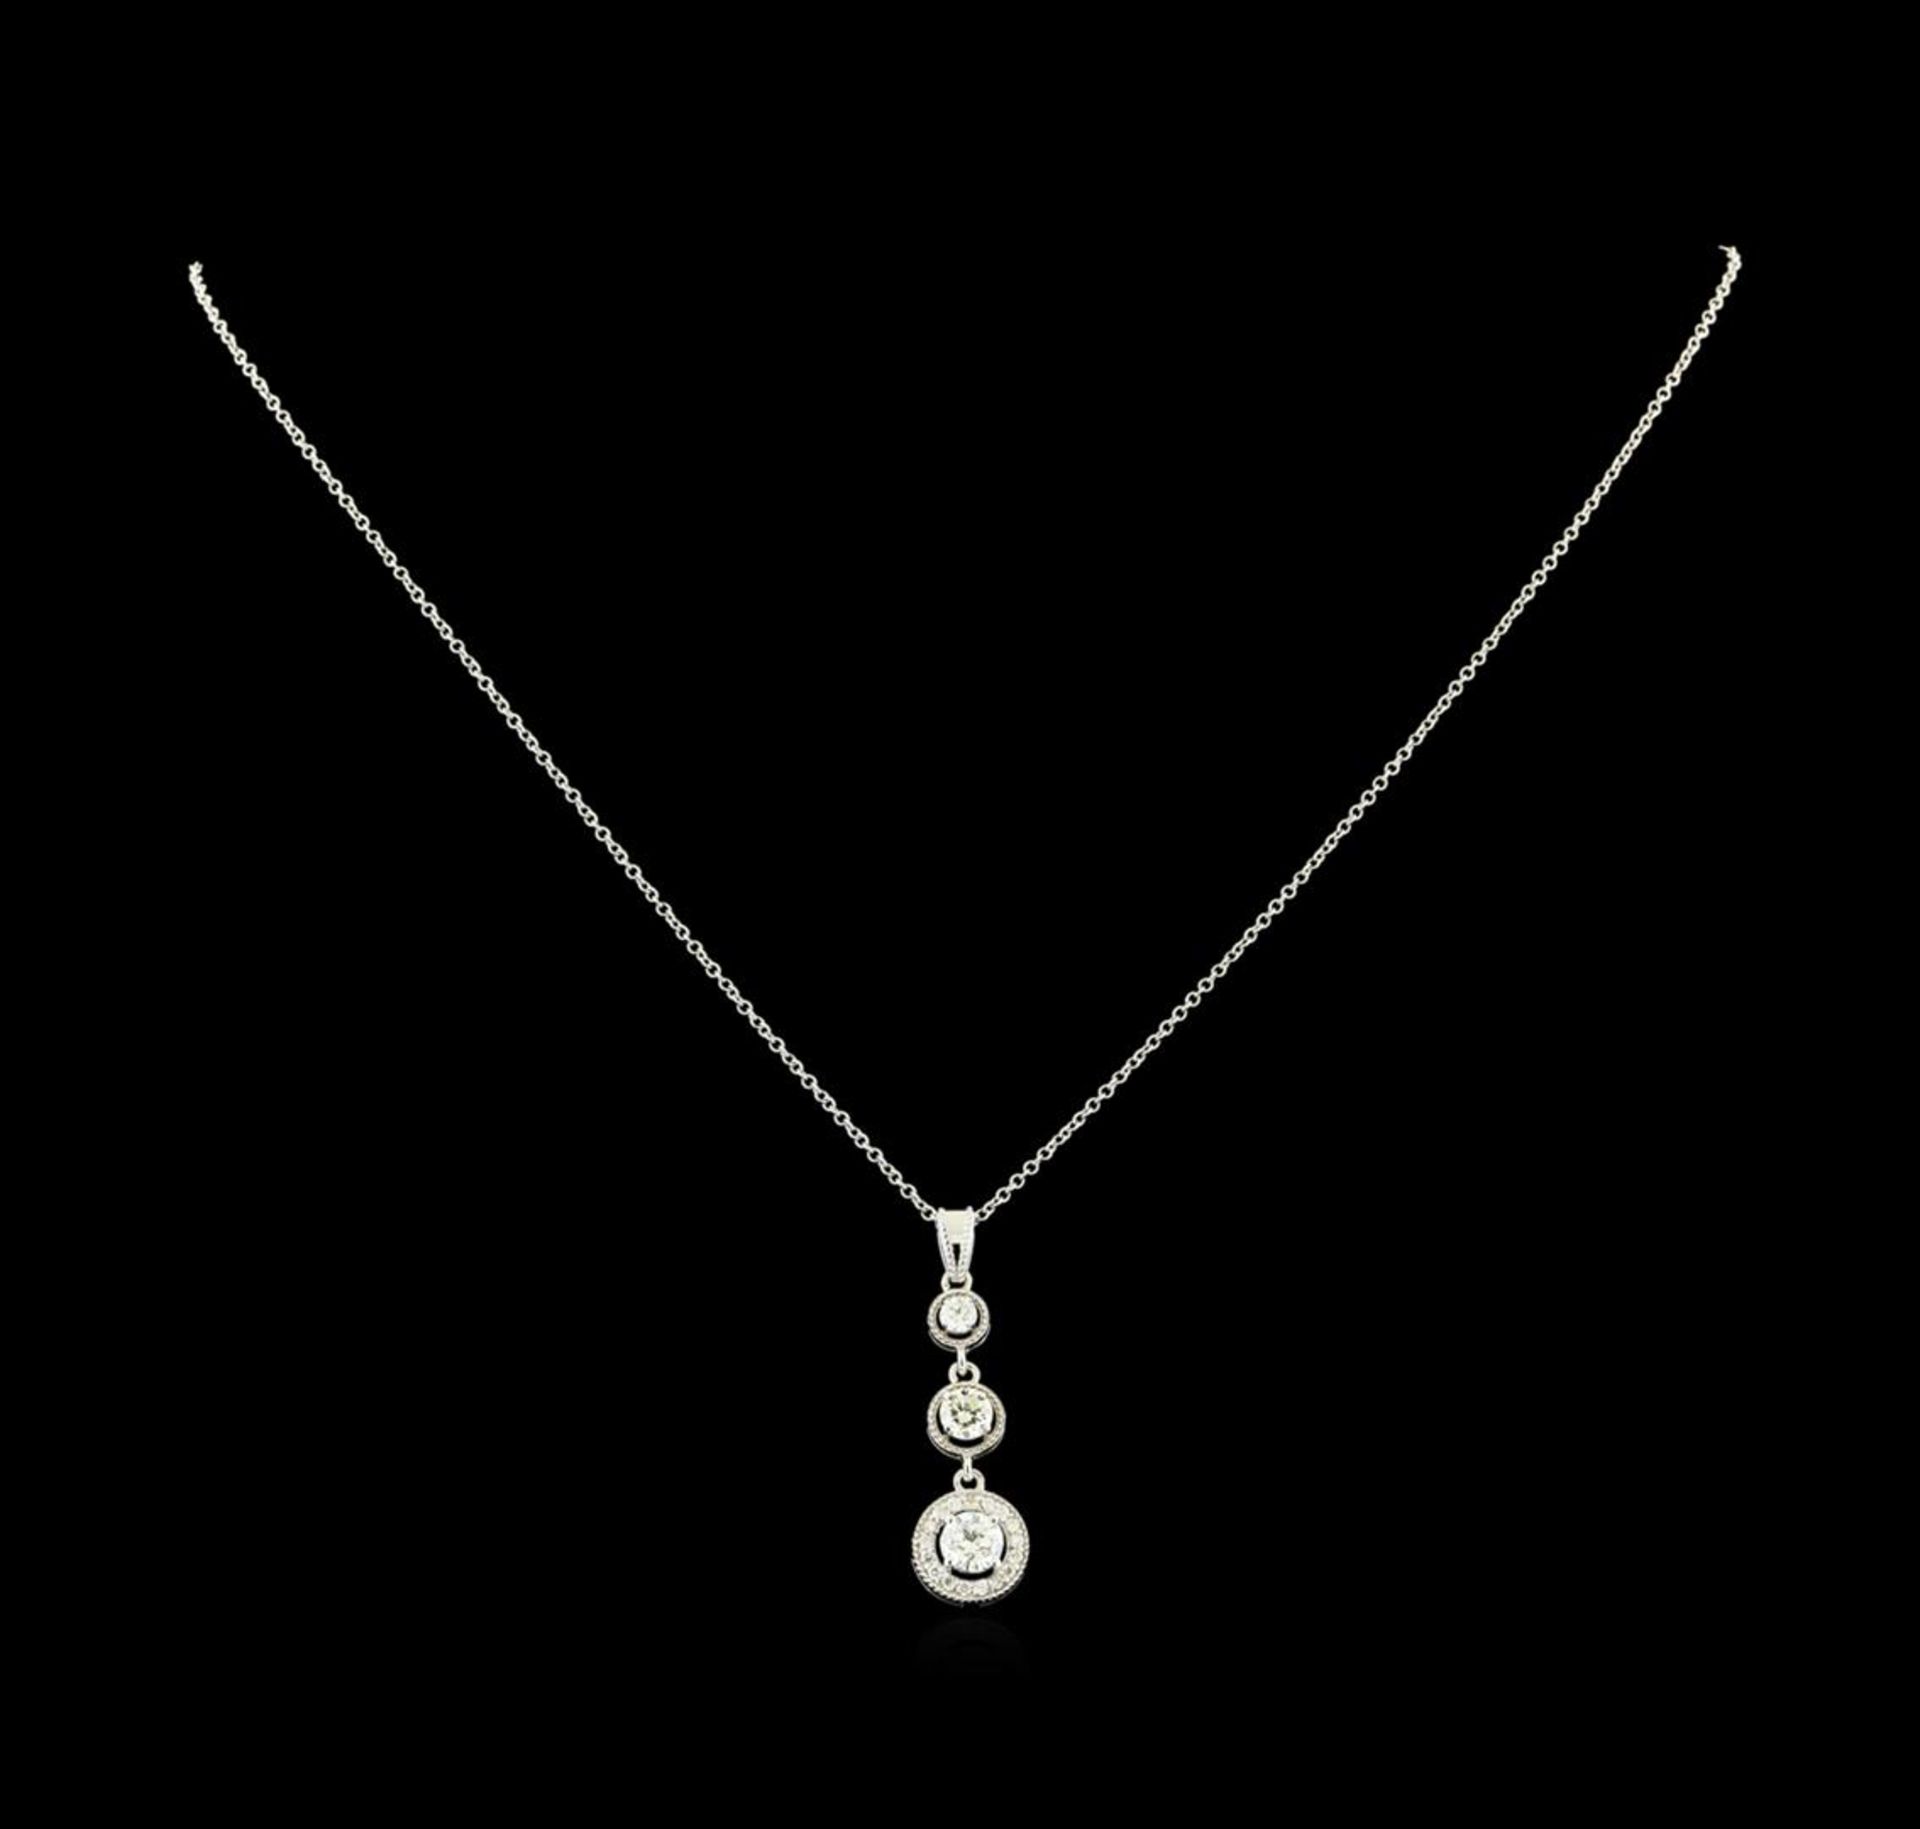 1.06 ctw Diamond Pendant With Chain - 14KT White Gold - Image 3 of 8